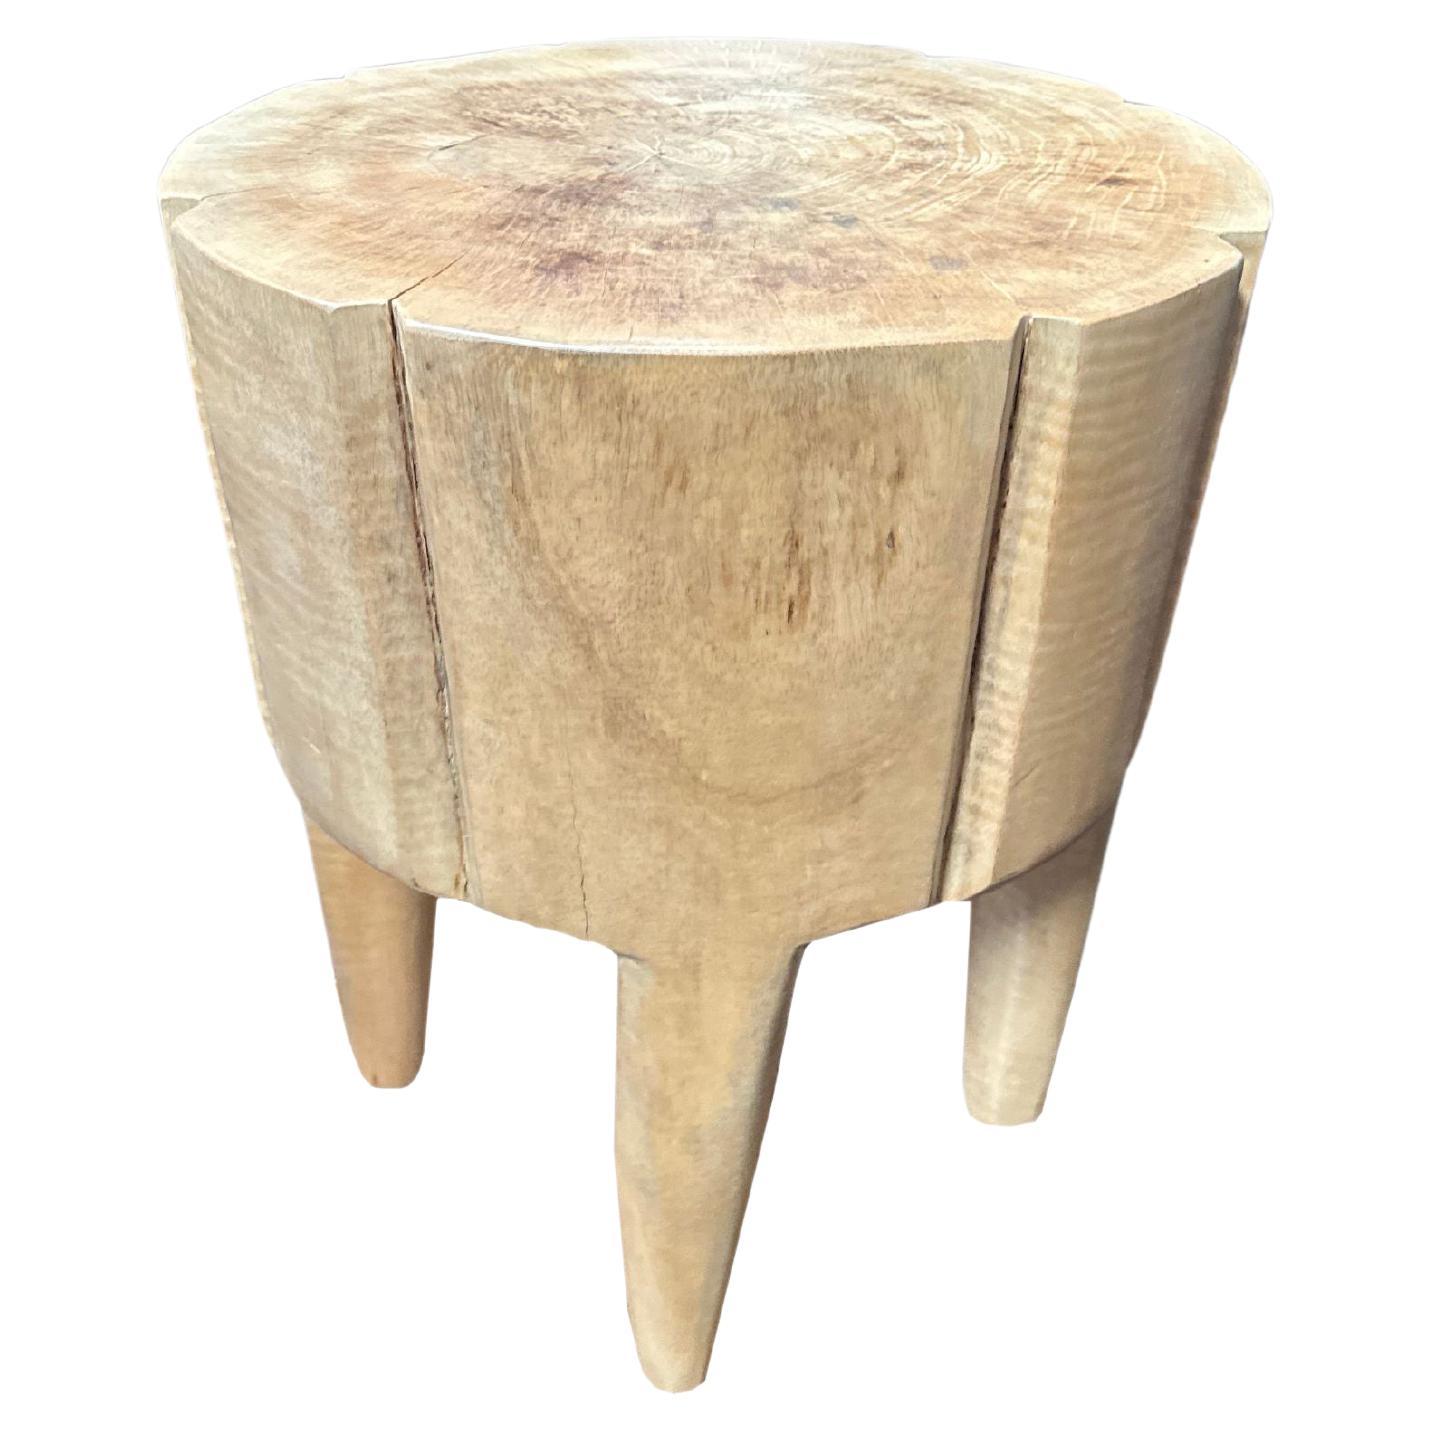 Sculptural Side Table Mango Wood Natural Finish For Sale